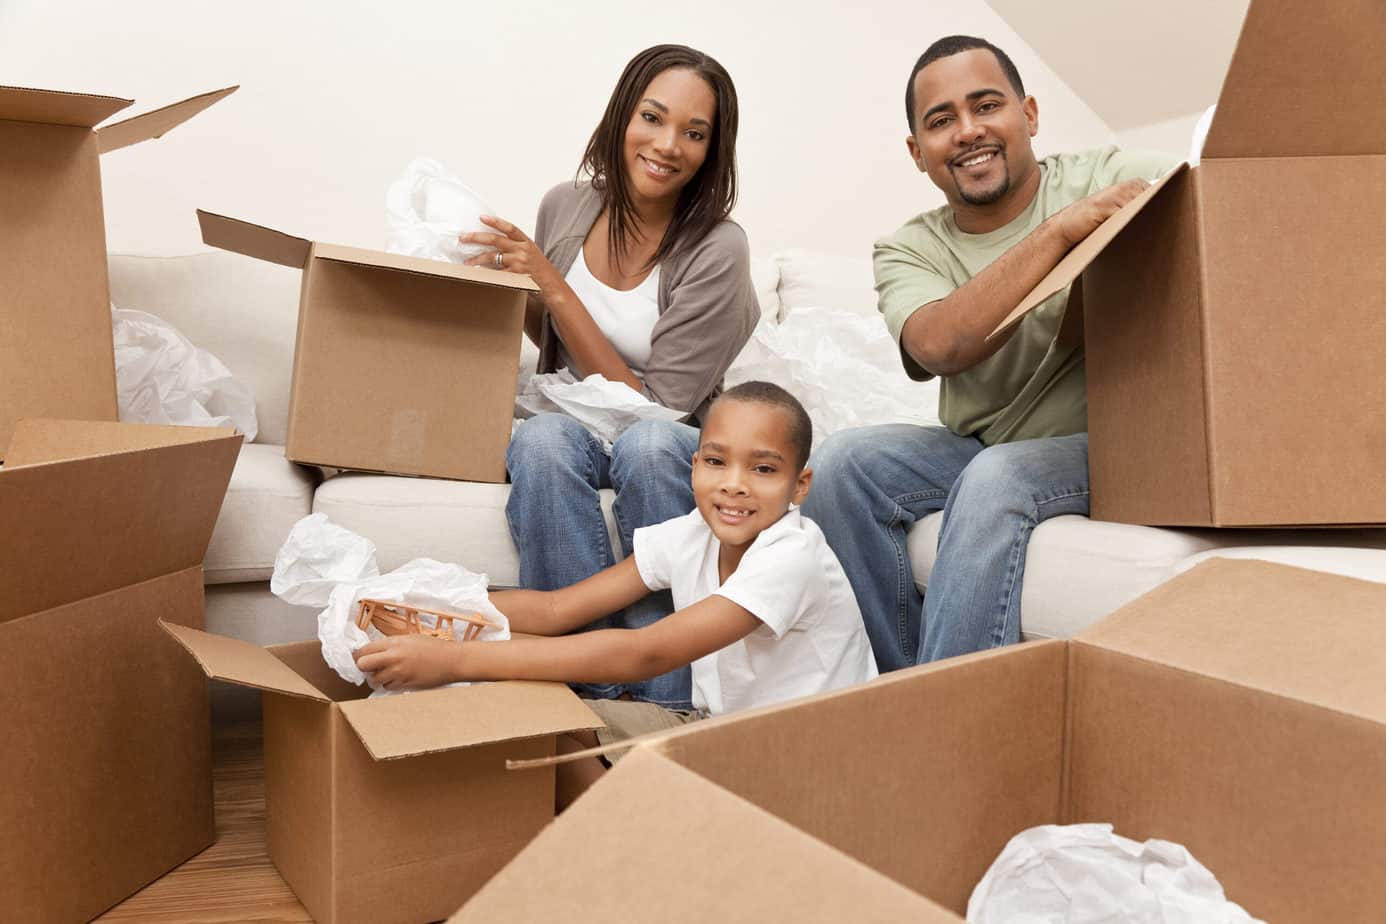 How to Make Buying and Moving into a New Home Go Smoothly